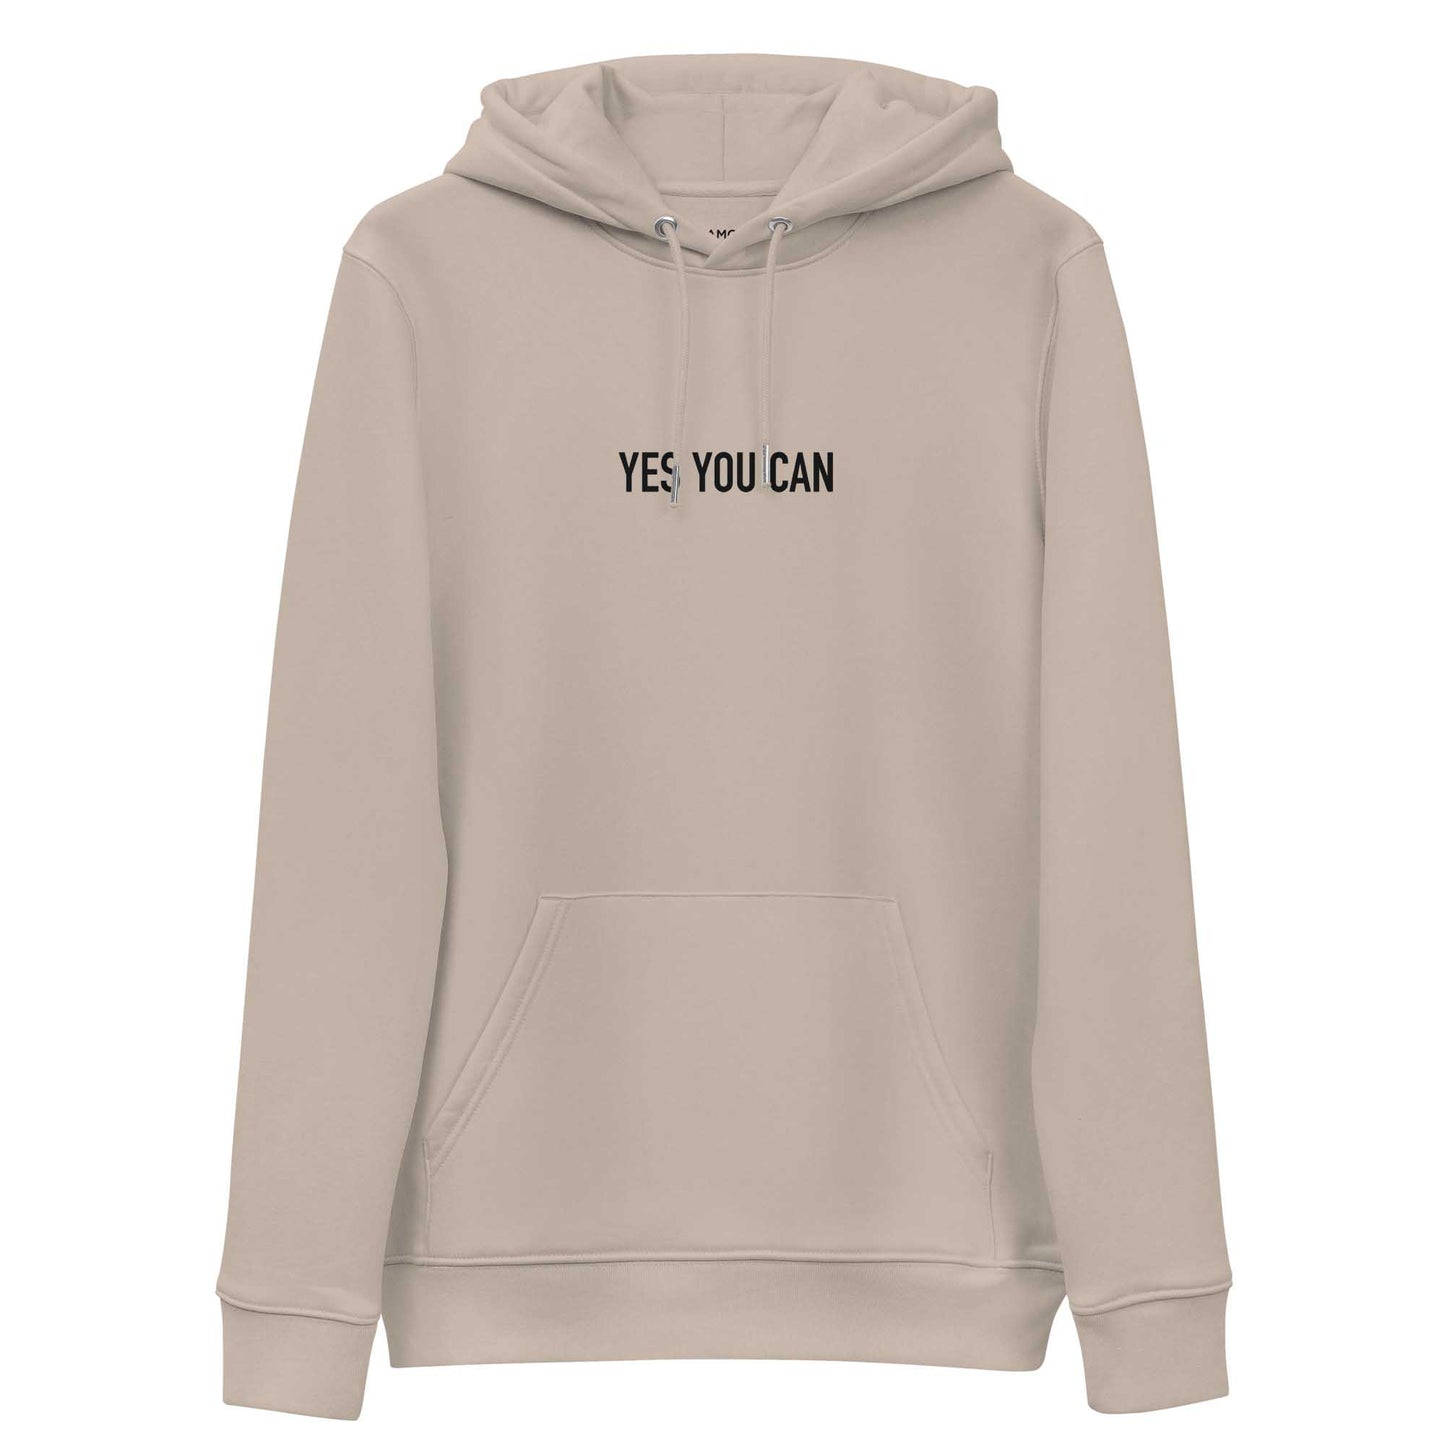 Women dust color motivational hoodie with inspirational quote, "Yes You Can."